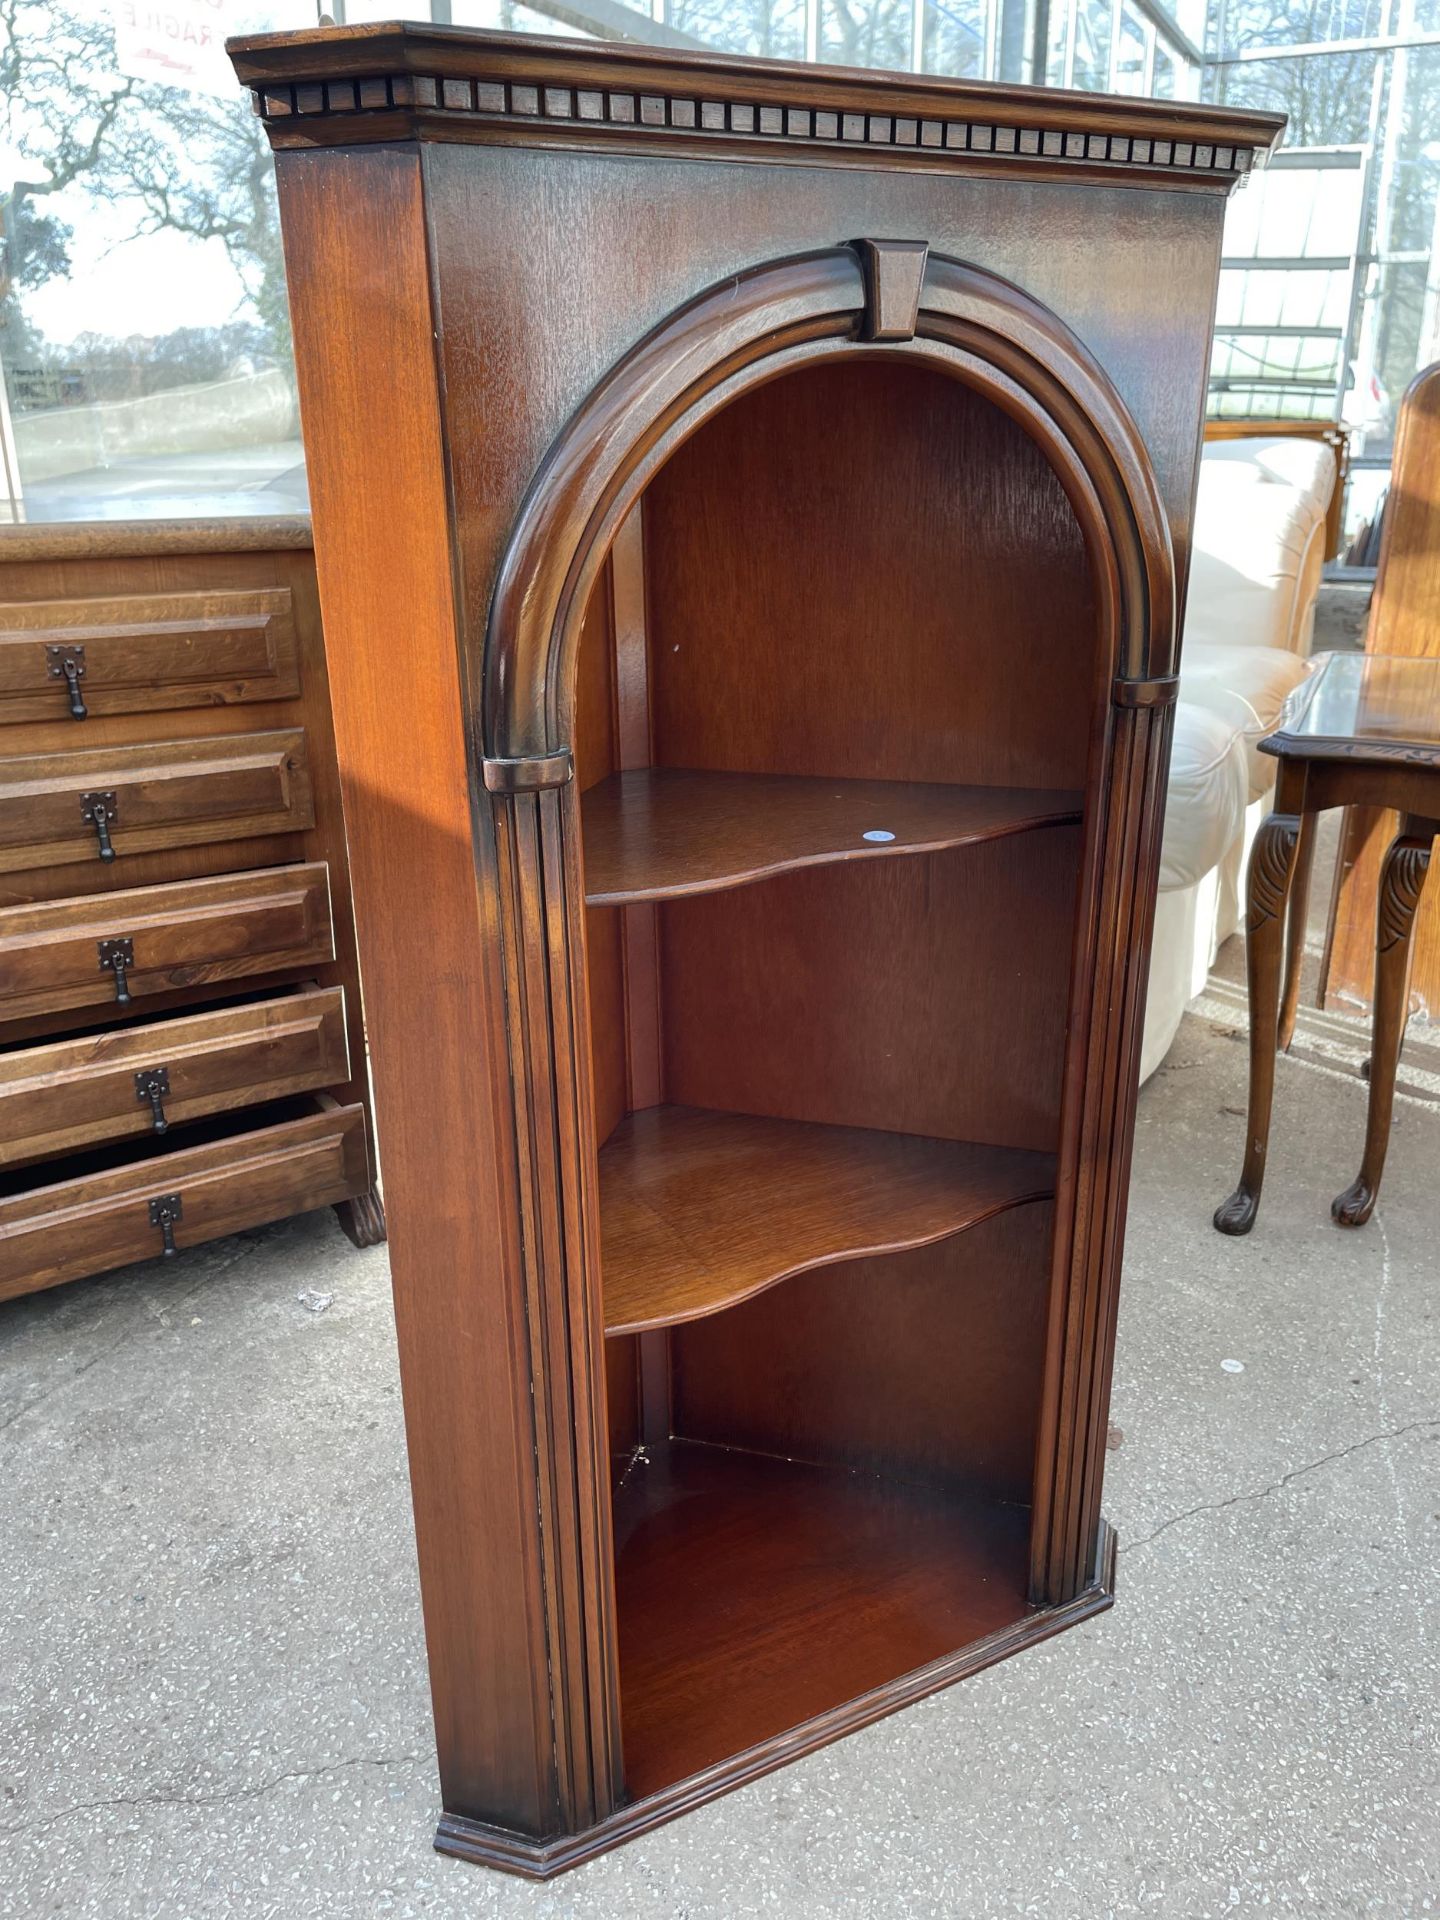 A REPRODUCTION MAHOGANY OPEN CORNER CUPBOARD - Image 2 of 2